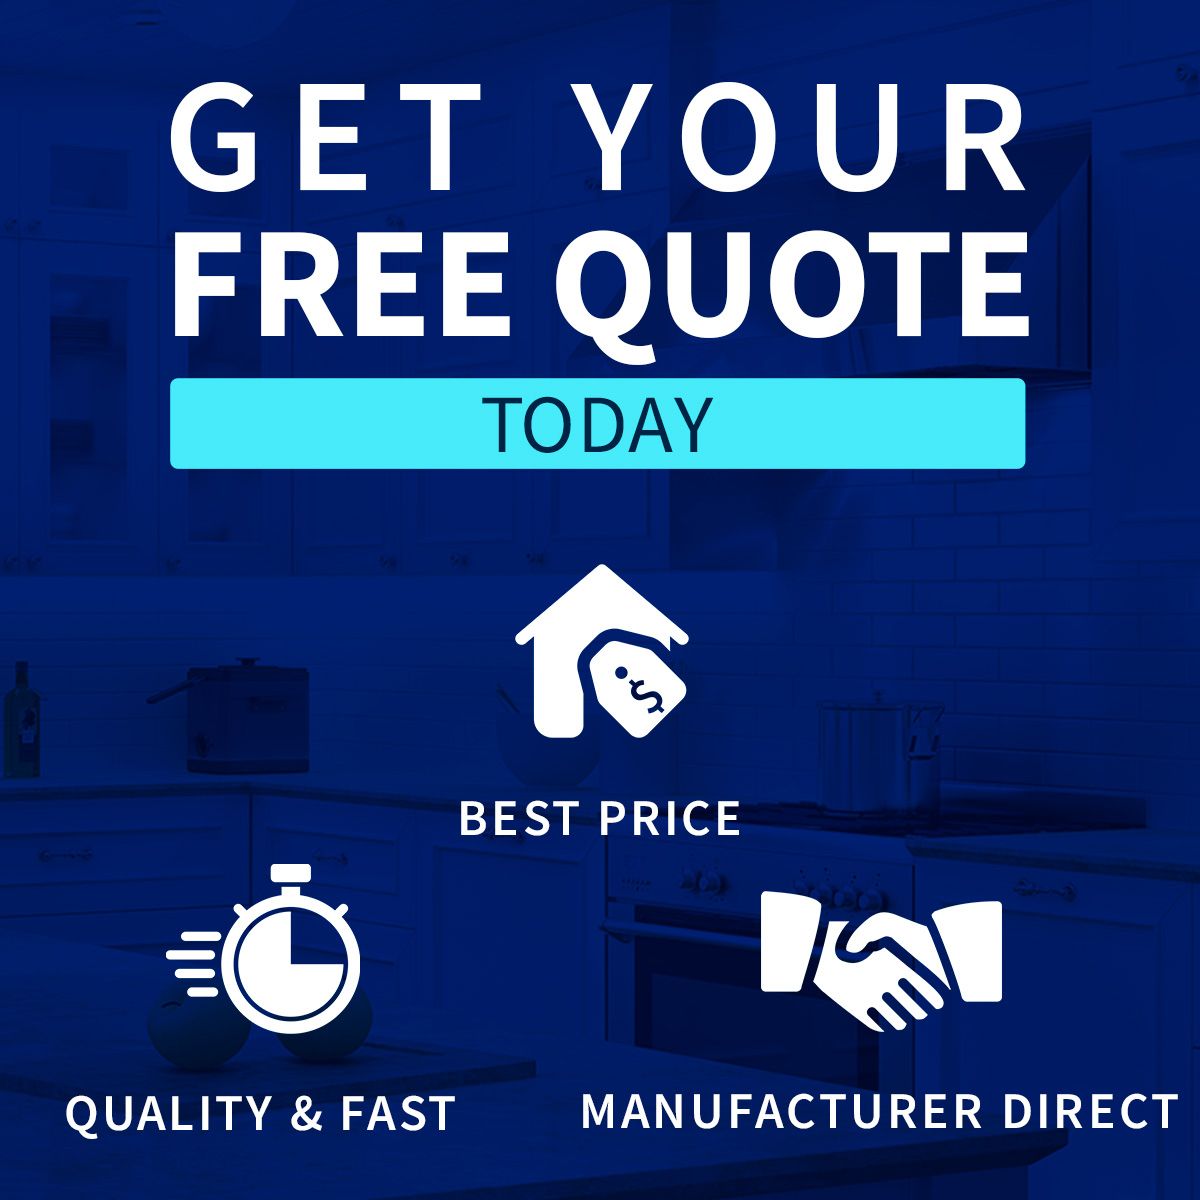 Get Your Free Quote Today